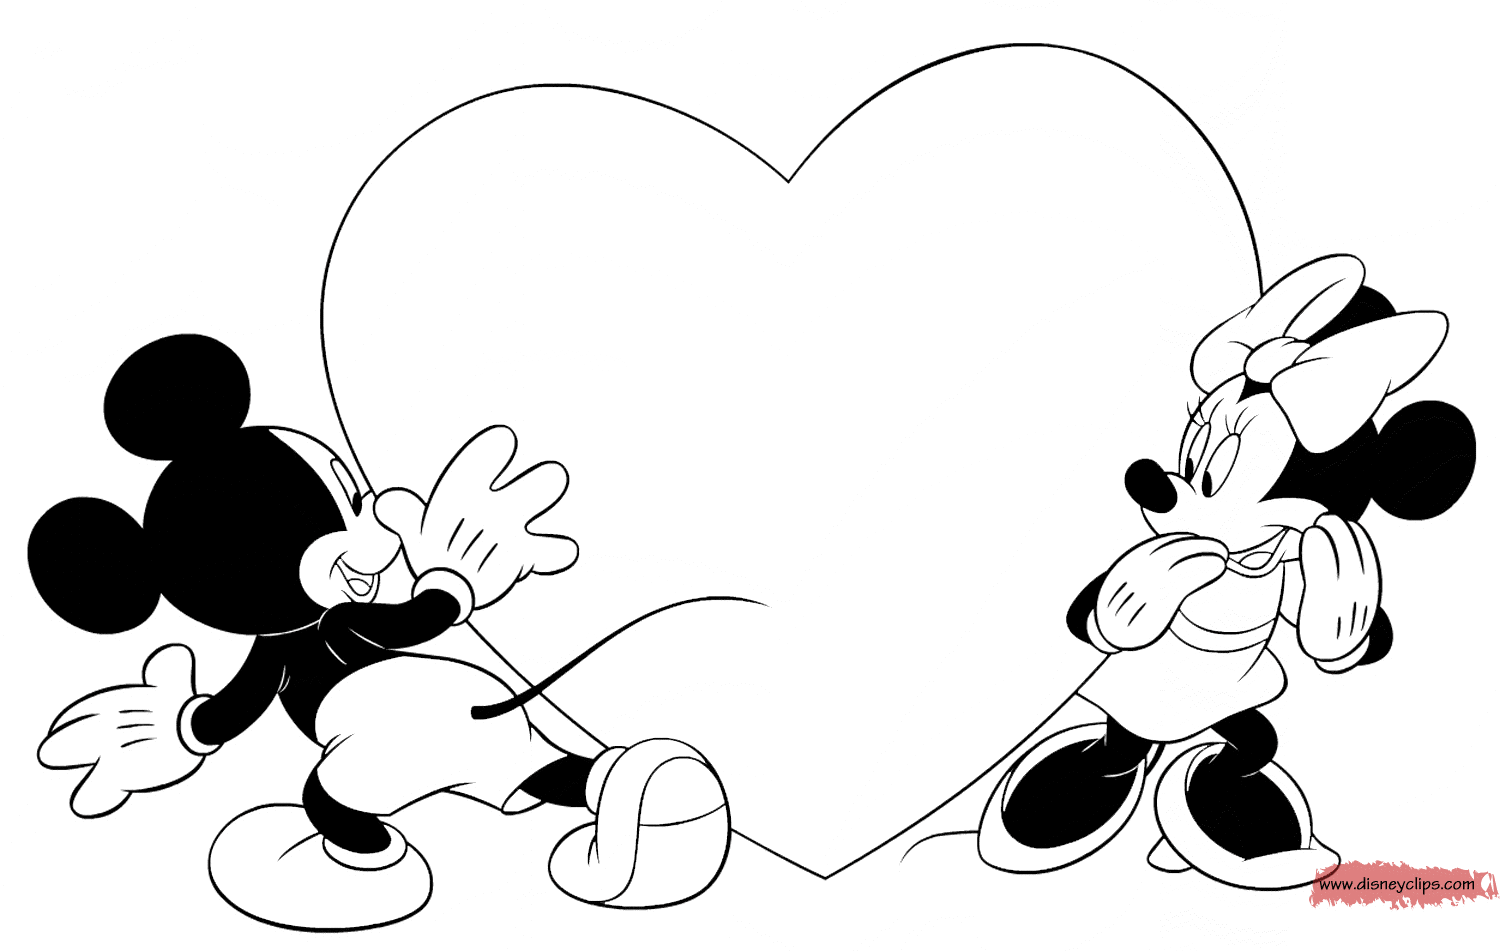 valentine-s-day-coloring-pages-disney-s-world-of-wonders